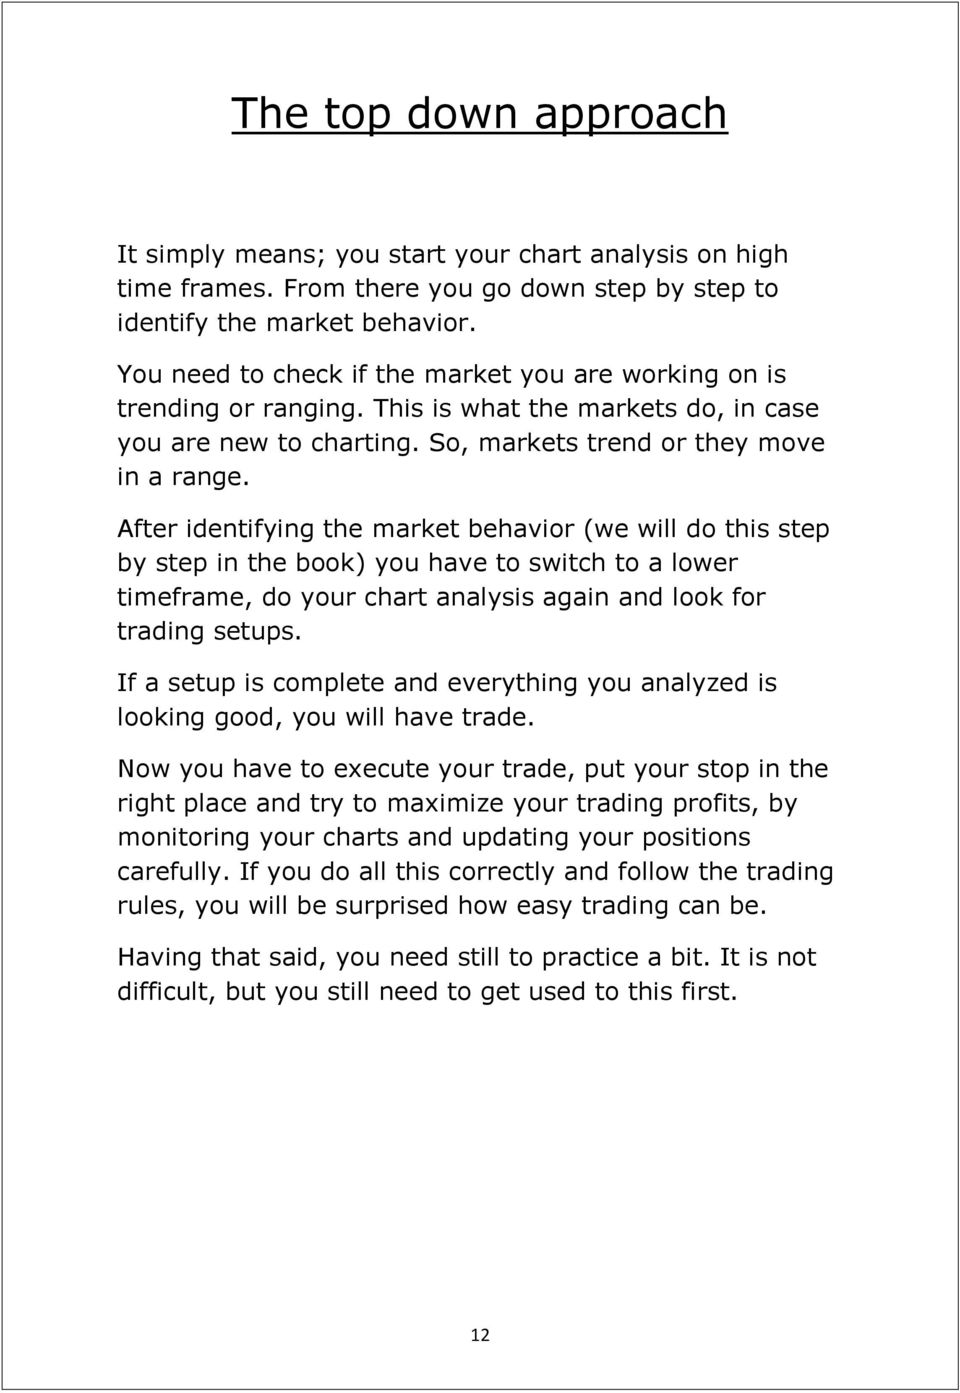 After identifying the market behavior (we will do this step by step in the book) you have to switch to a lower timeframe, do your chart analysis again and look for trading setups.